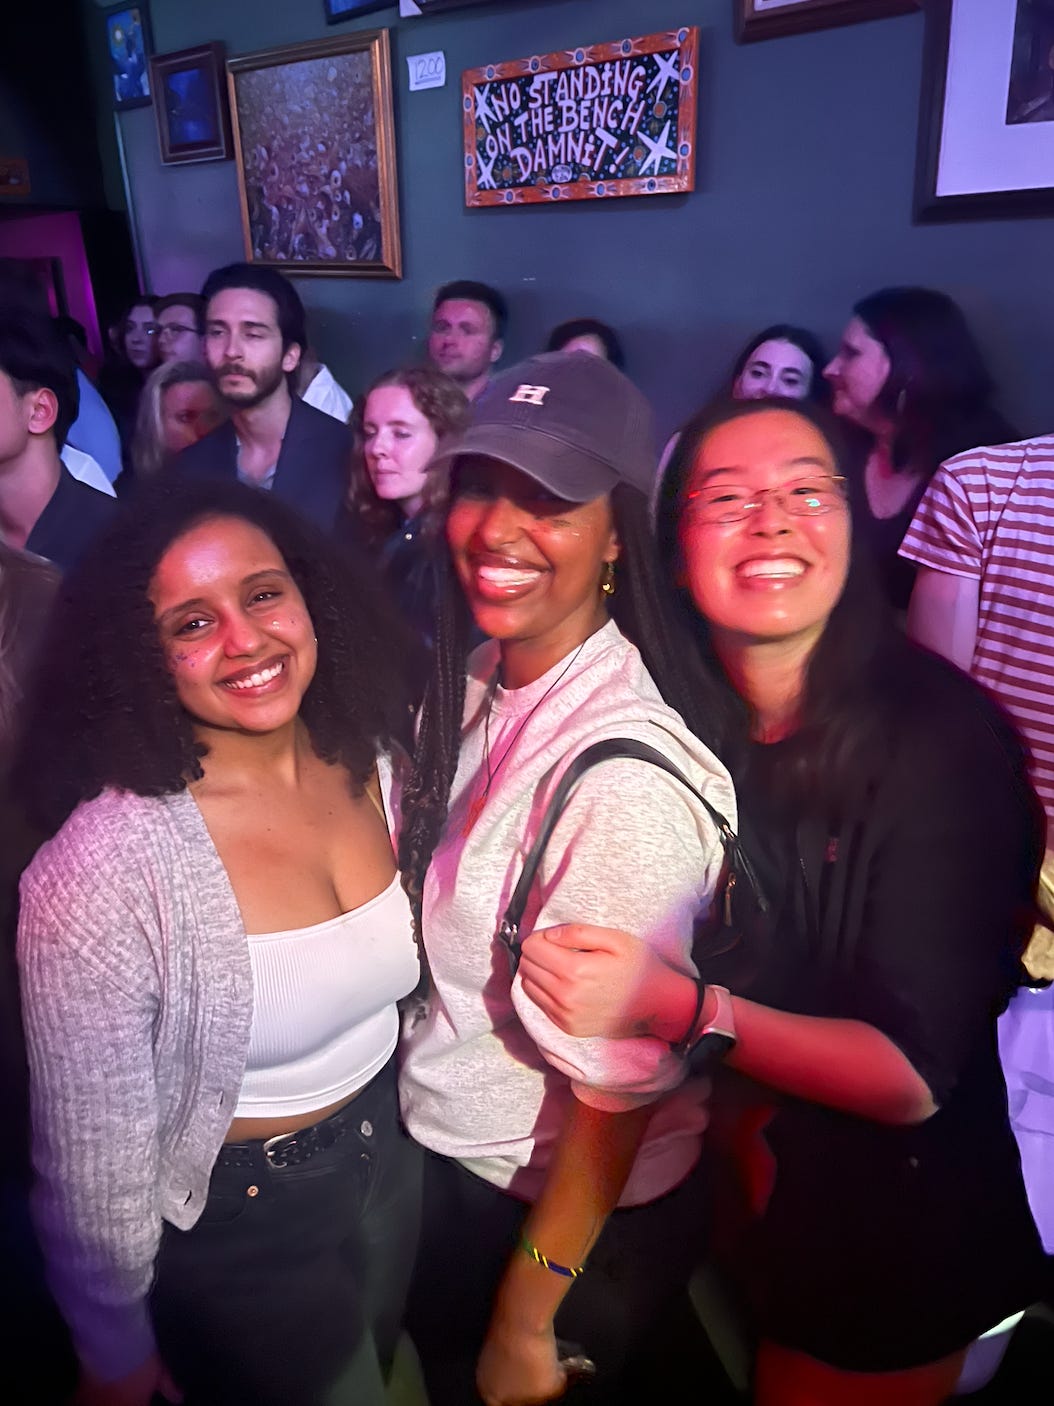 Three girls standing in a Jazz bar, crowd around them as they smile into the camera.